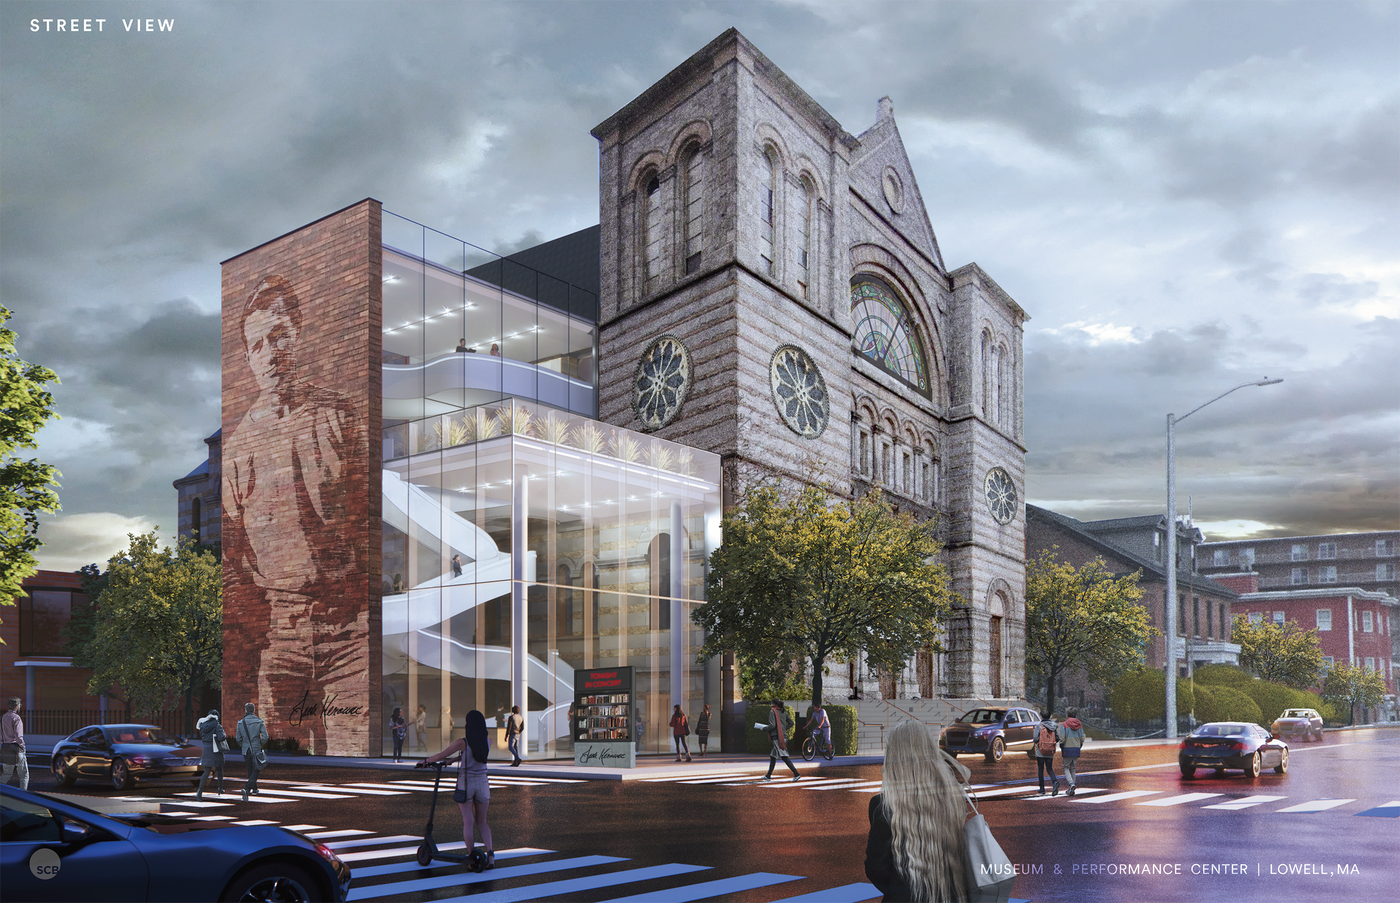 THE JACK KEROUAC FOUNDATION SHARES PLANS FOR THE MULTI-FACETED JACK KEROUAC CENTER IN THE AUTHOR’S HOMETOWN OF LOWELL, MA